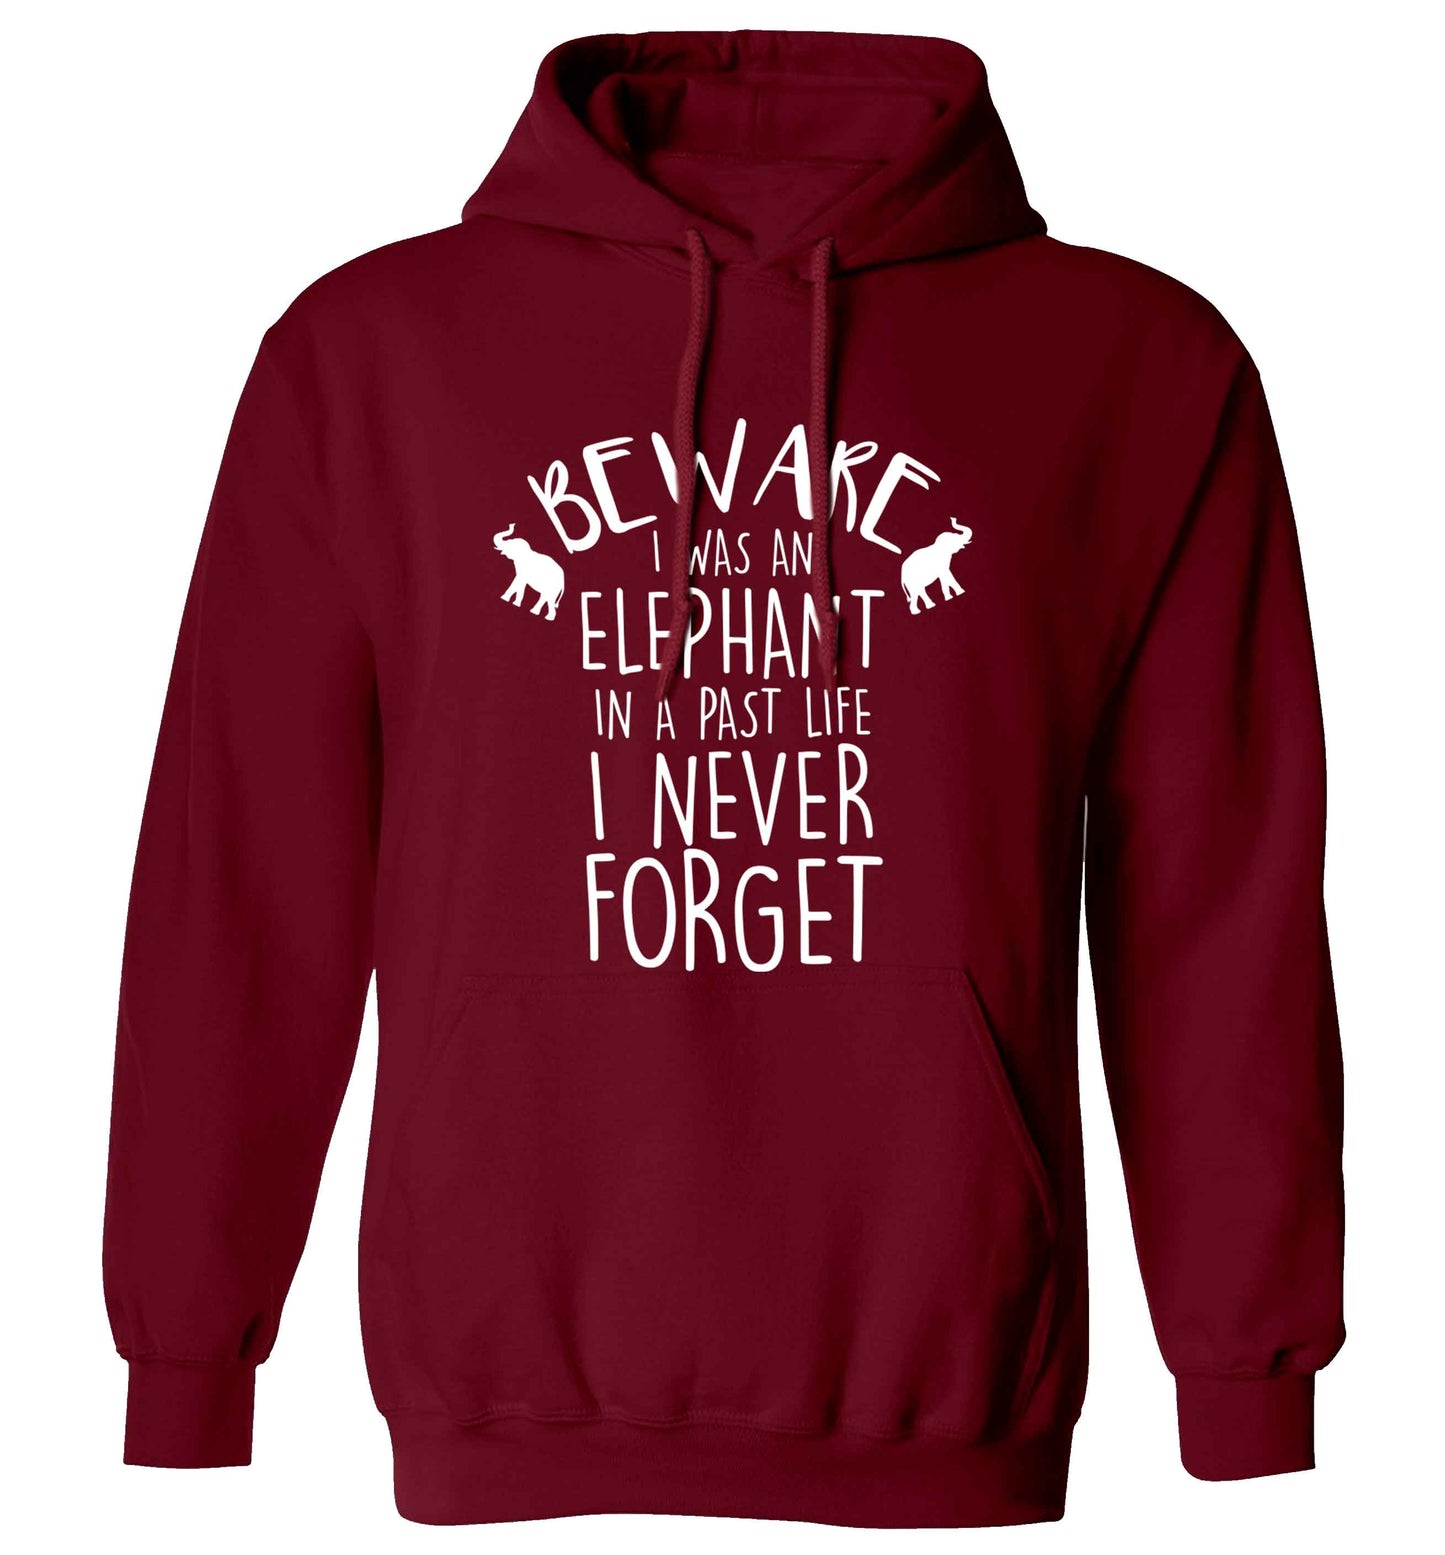 Beware I was an elephant in my past life I never forget adults unisex maroon hoodie 2XL